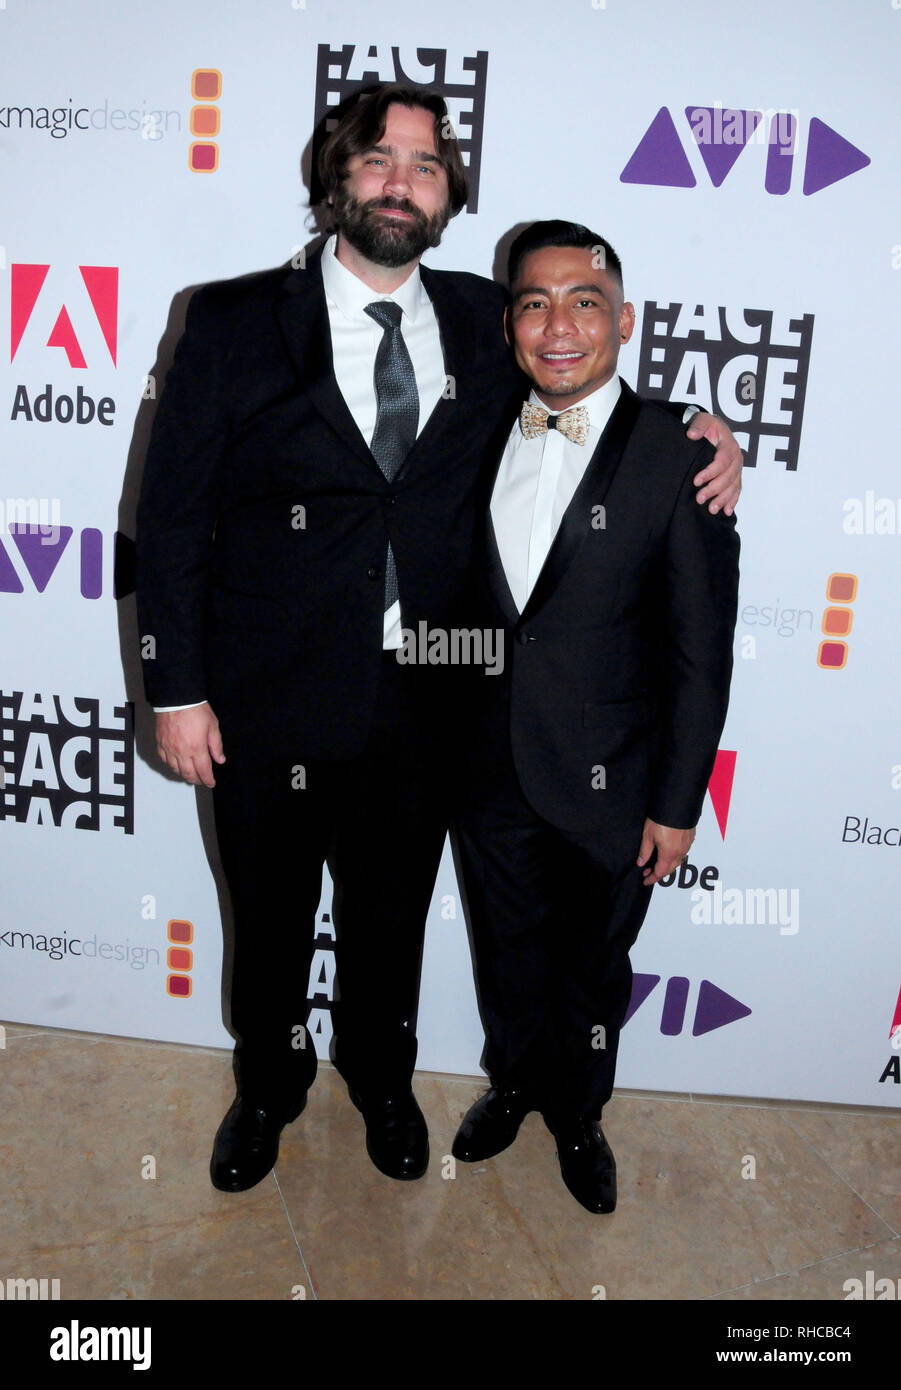 BEVERLY HILLS, CA - FEBRUARY 1: Editors Rob Butler and Ben Bulatao attend ACE 69th Annual Eddie Awards on February 1, 2019 at the Beverly Hilton Hotel in Beverly Hills, California. Photo by Barry King/Alamy Stock Photo Stock Photo